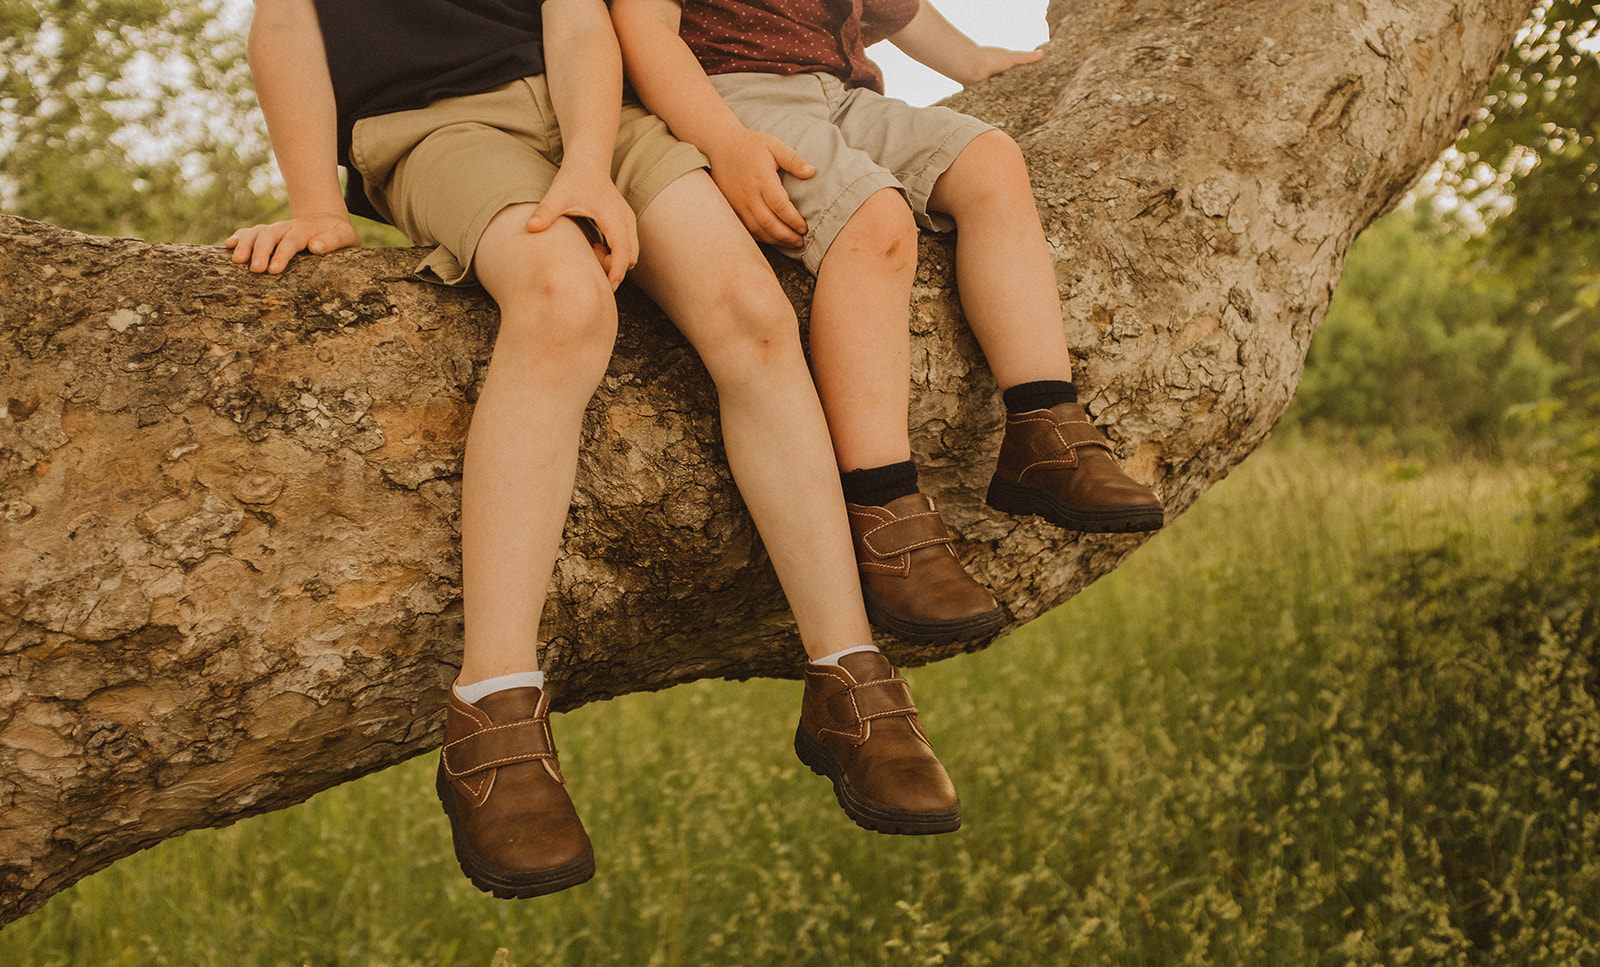 Two little boys sit on the branch of a tree. Image features the lower half of their bodies, with feet dangling in the air.